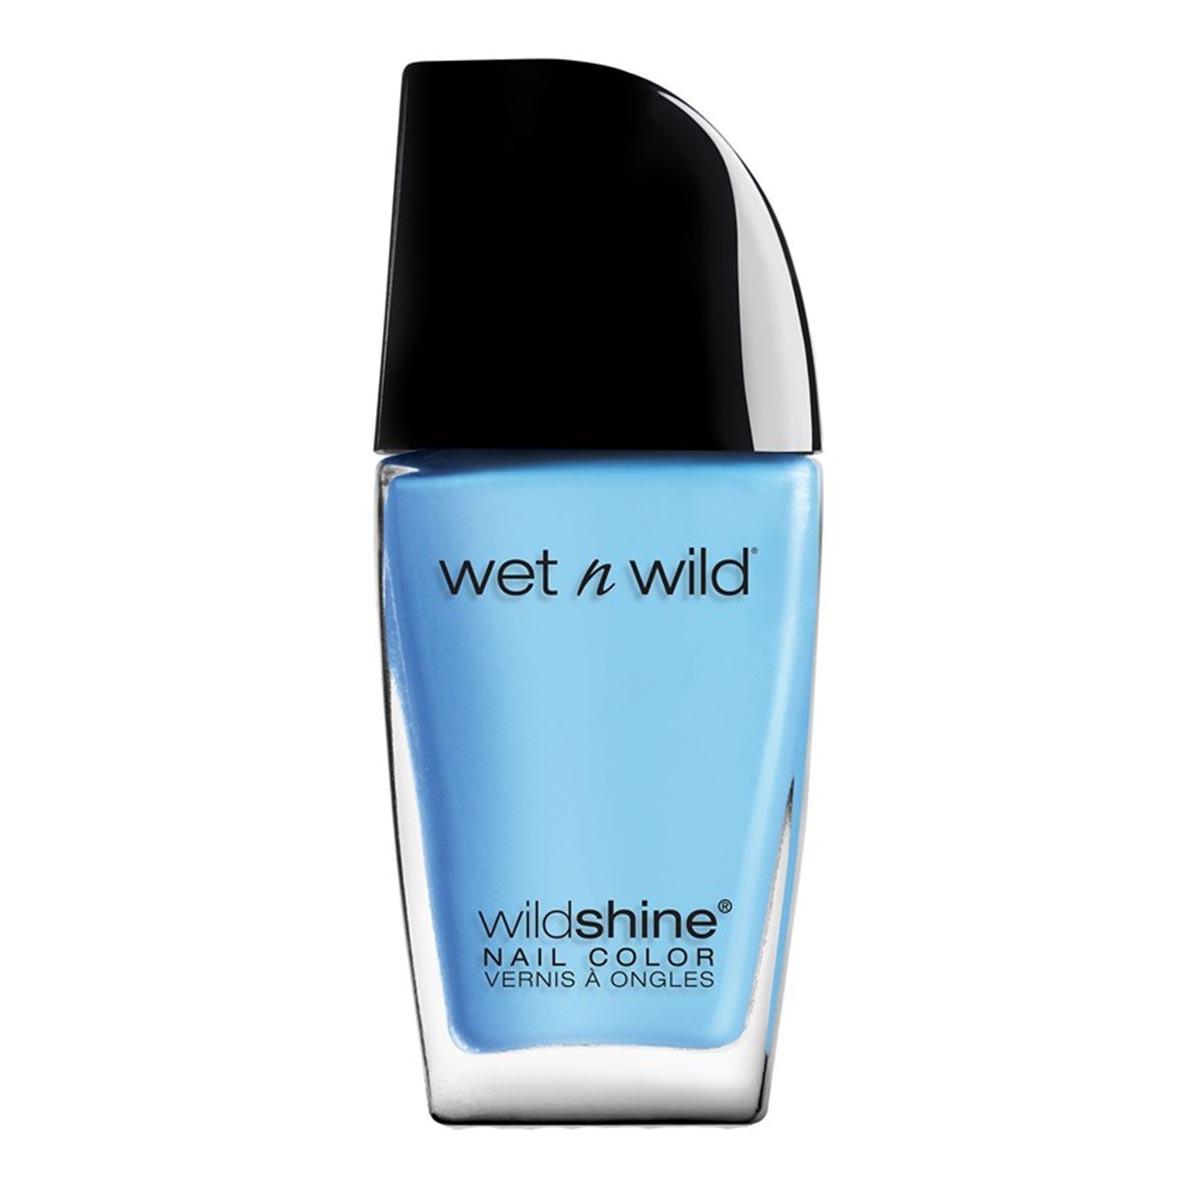 wet-n-wild-wildshine-nail-color-putting-on-airs